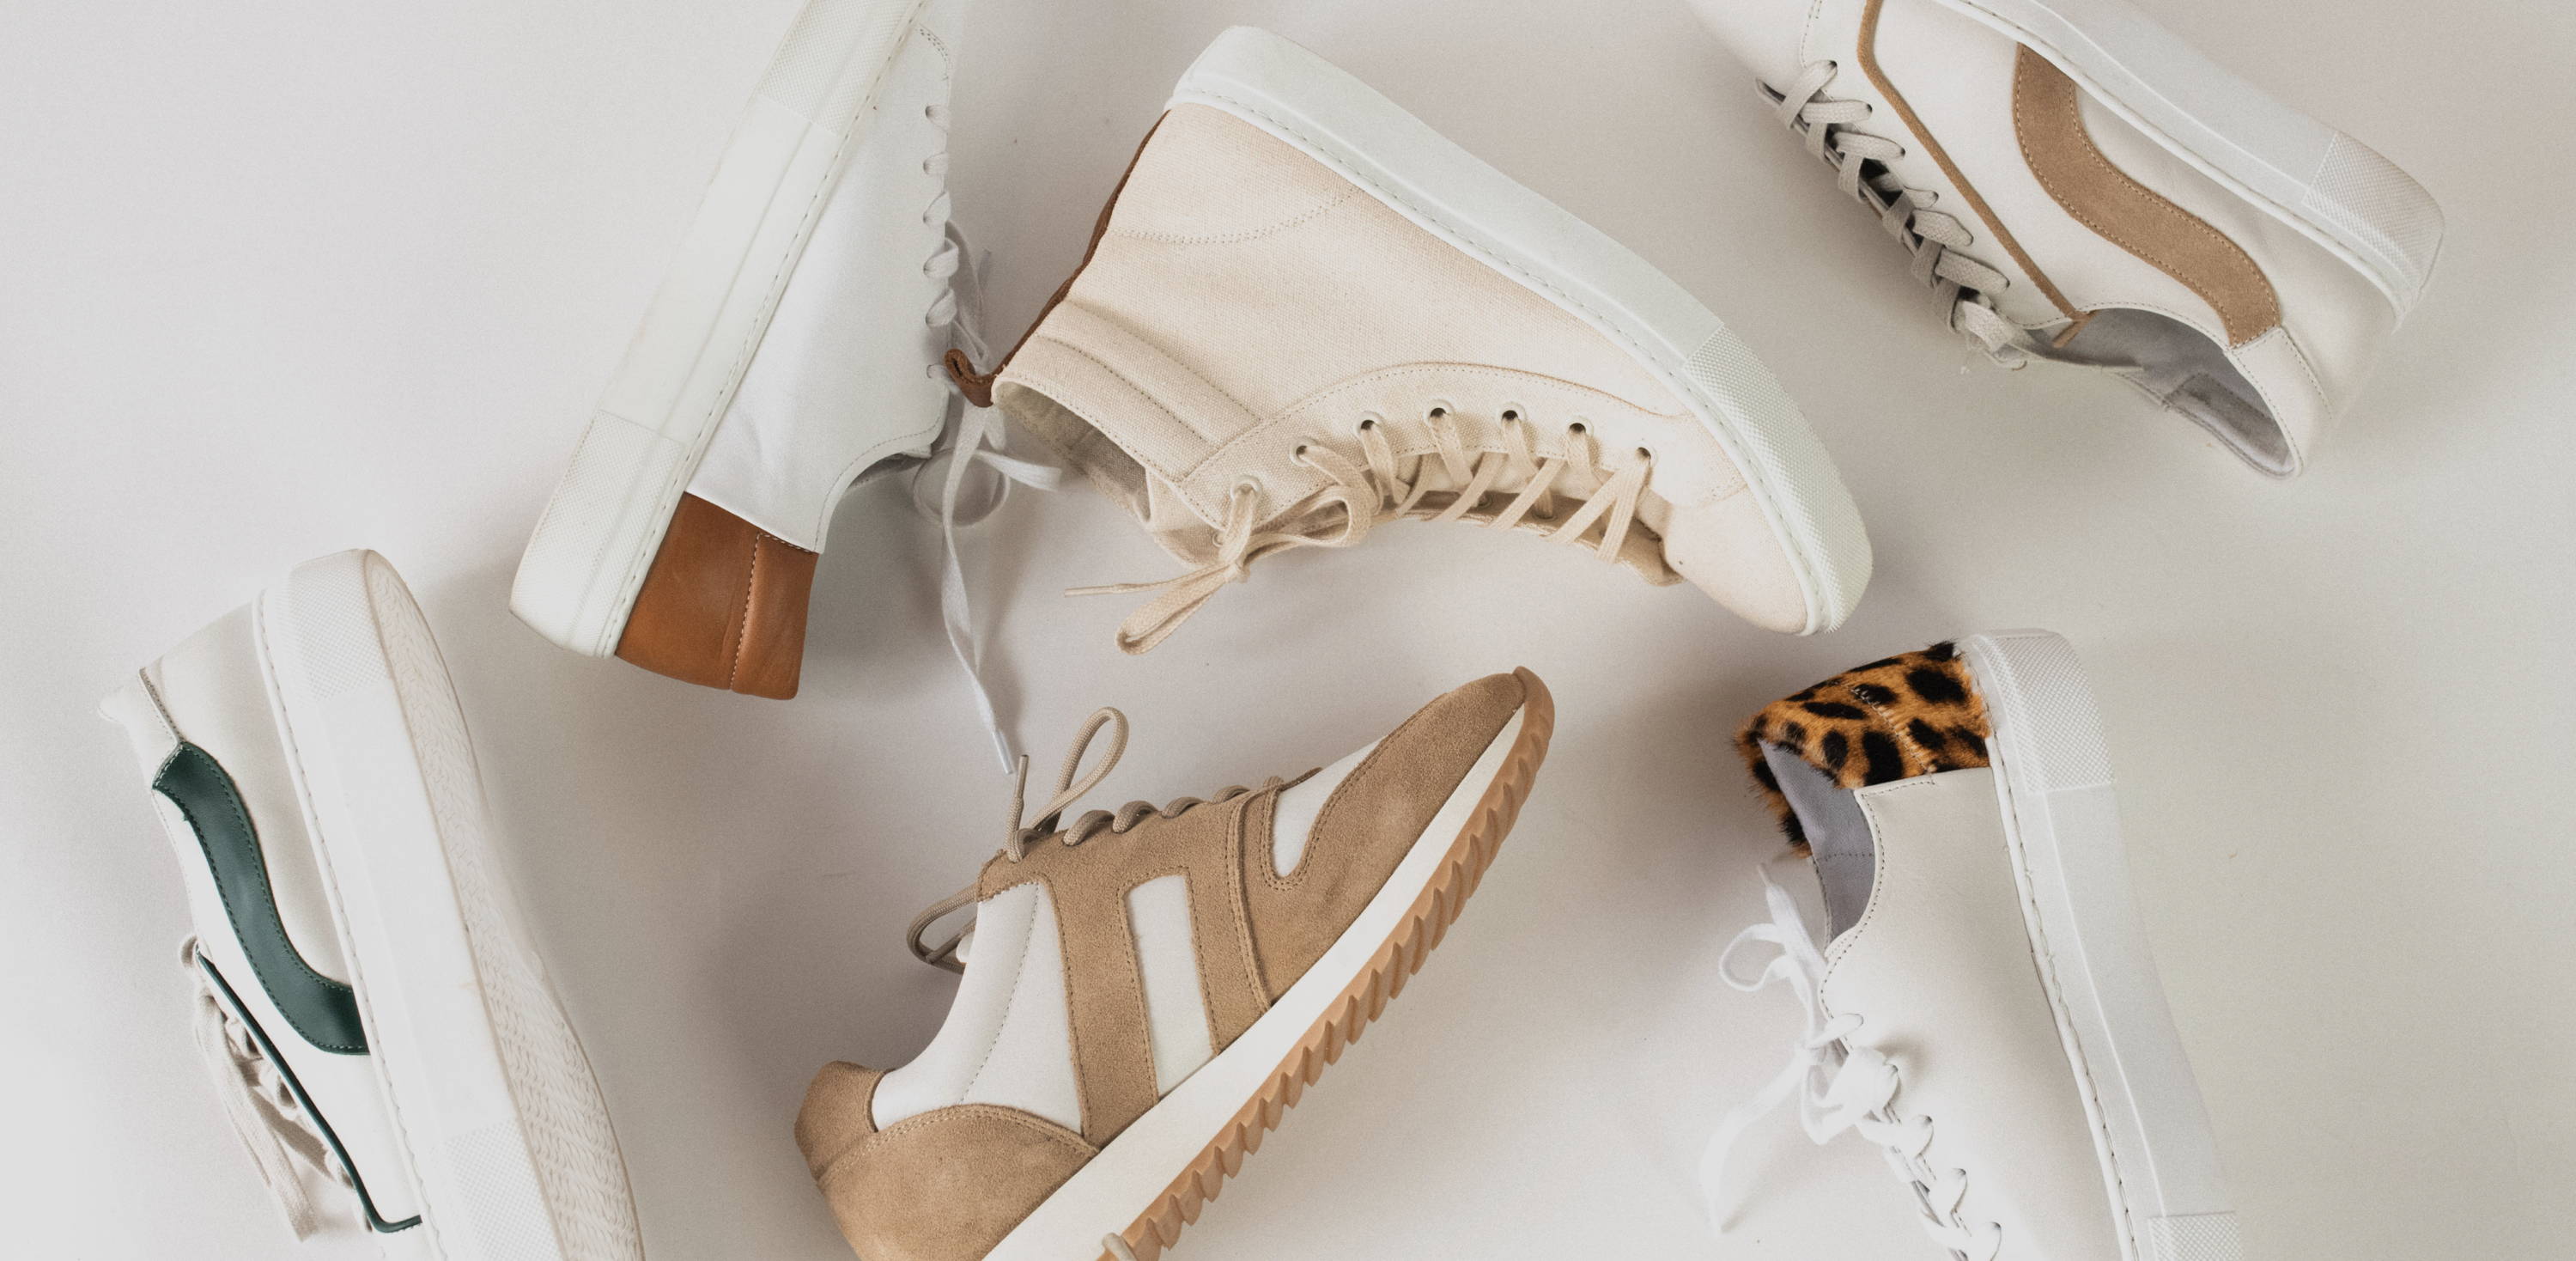 20% off Sneakers for 48 hours 